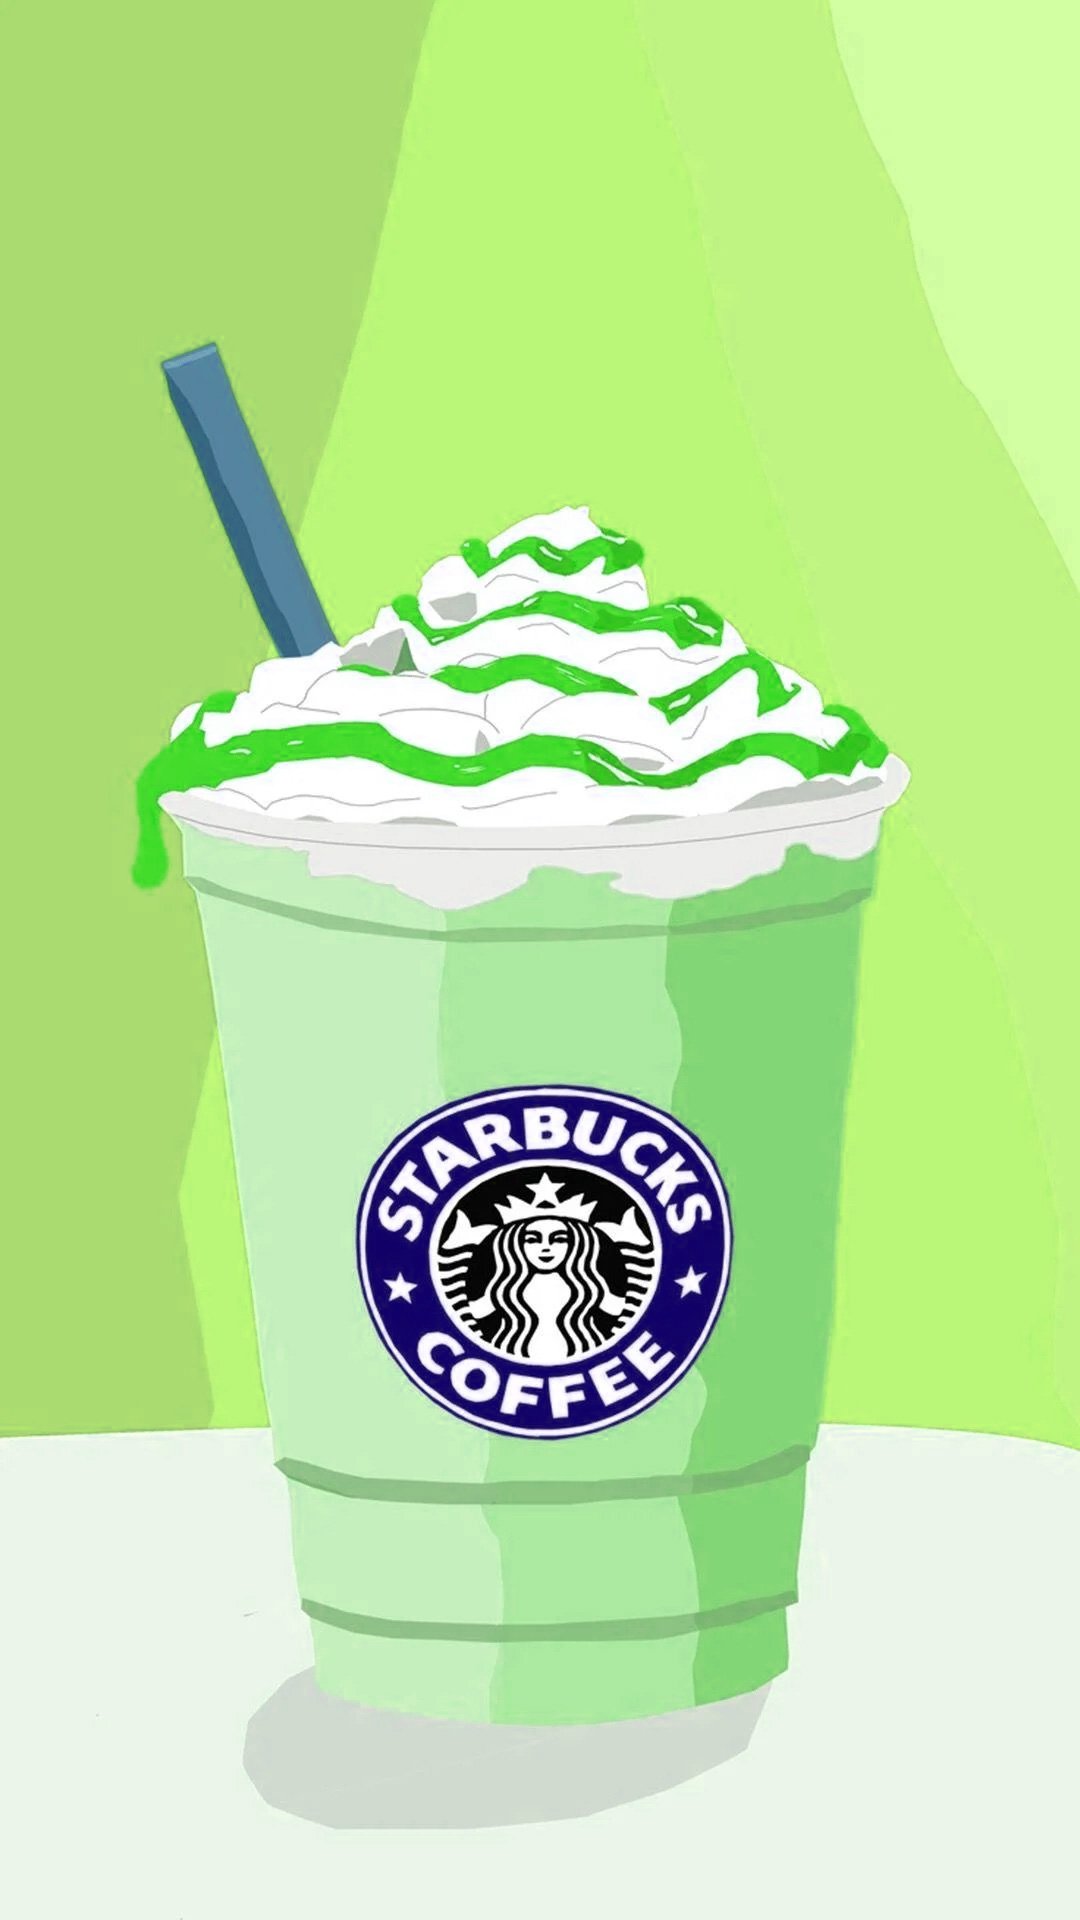 Download wallpaper 800x1200 starbucks, coffee, cappuccino, glass iphone  4s/4 for parallax hd background